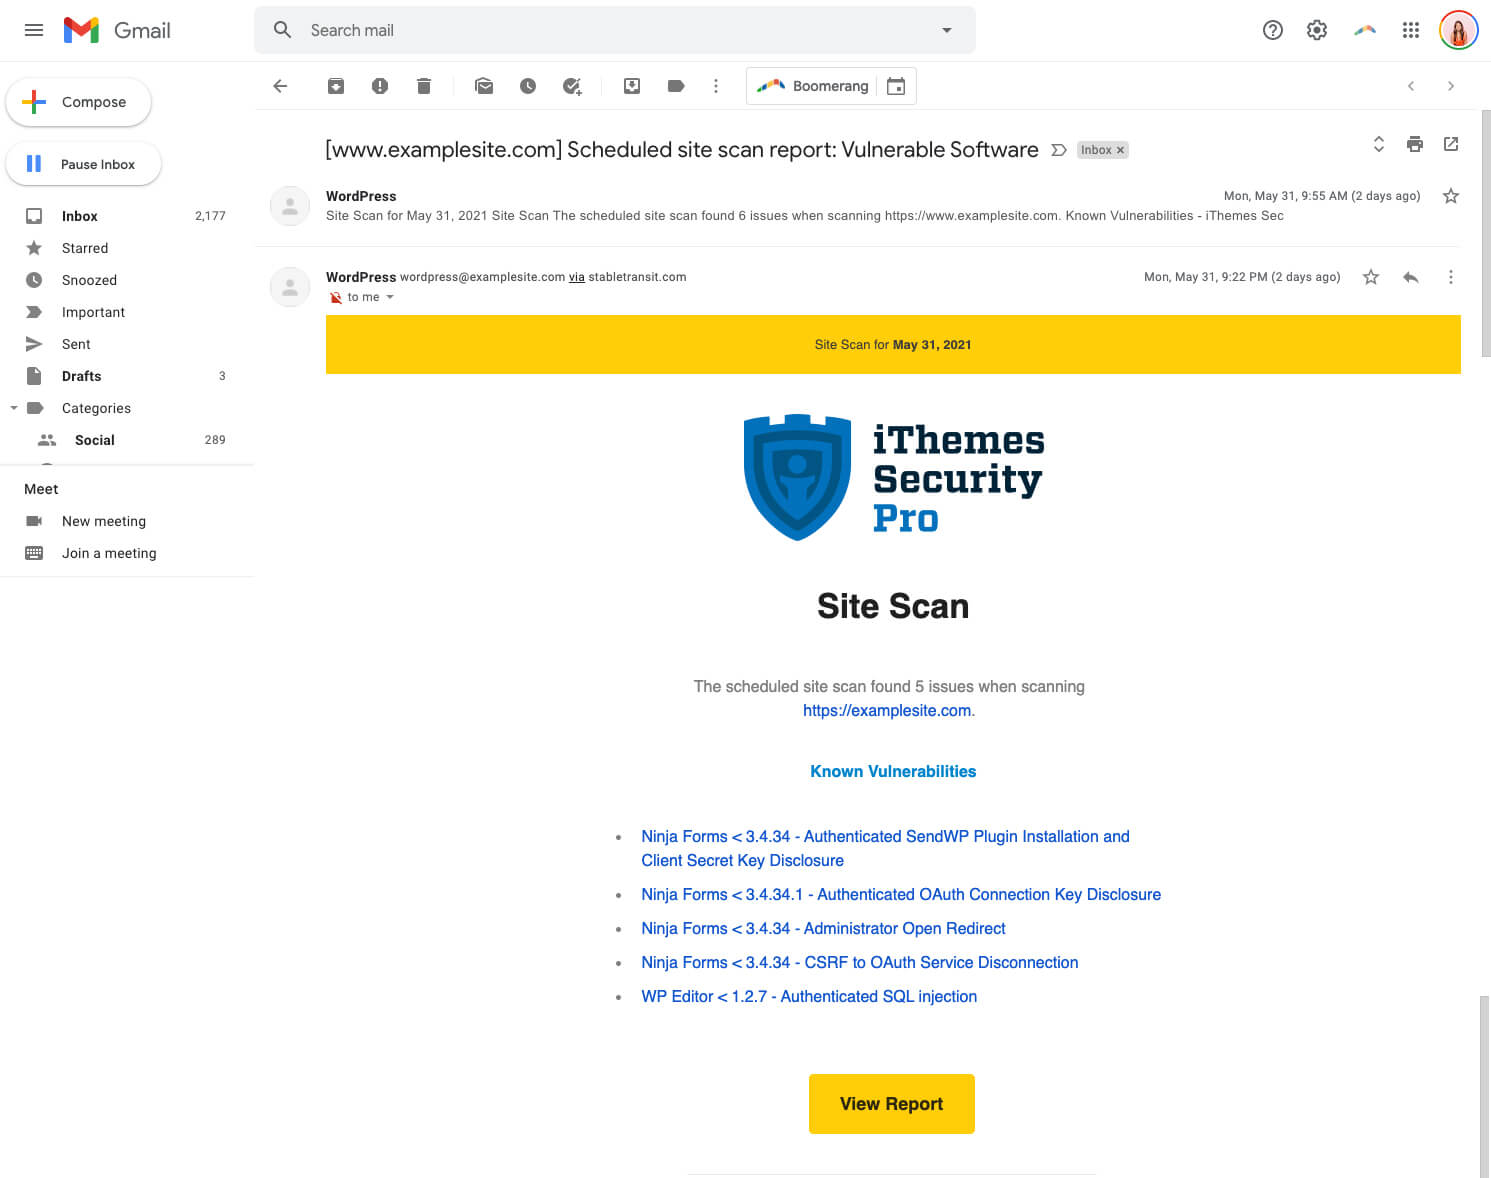 iThemes Security’s Site Scan warns designated users about vulnerable software by sending them actionable email notifications.